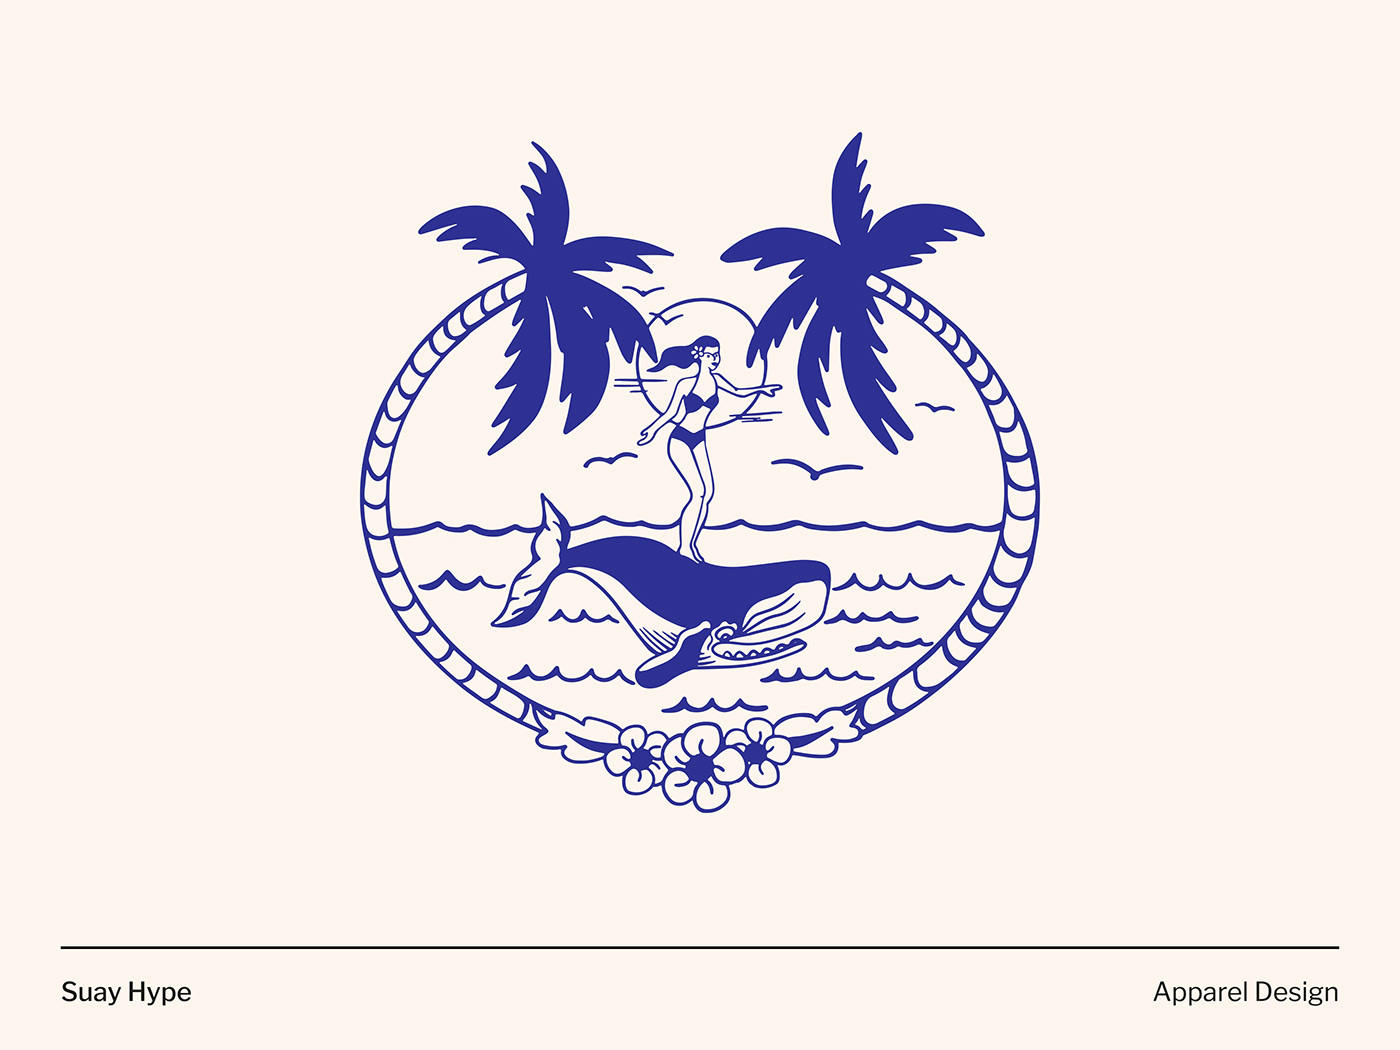 Woman surfing on a whale apparel design